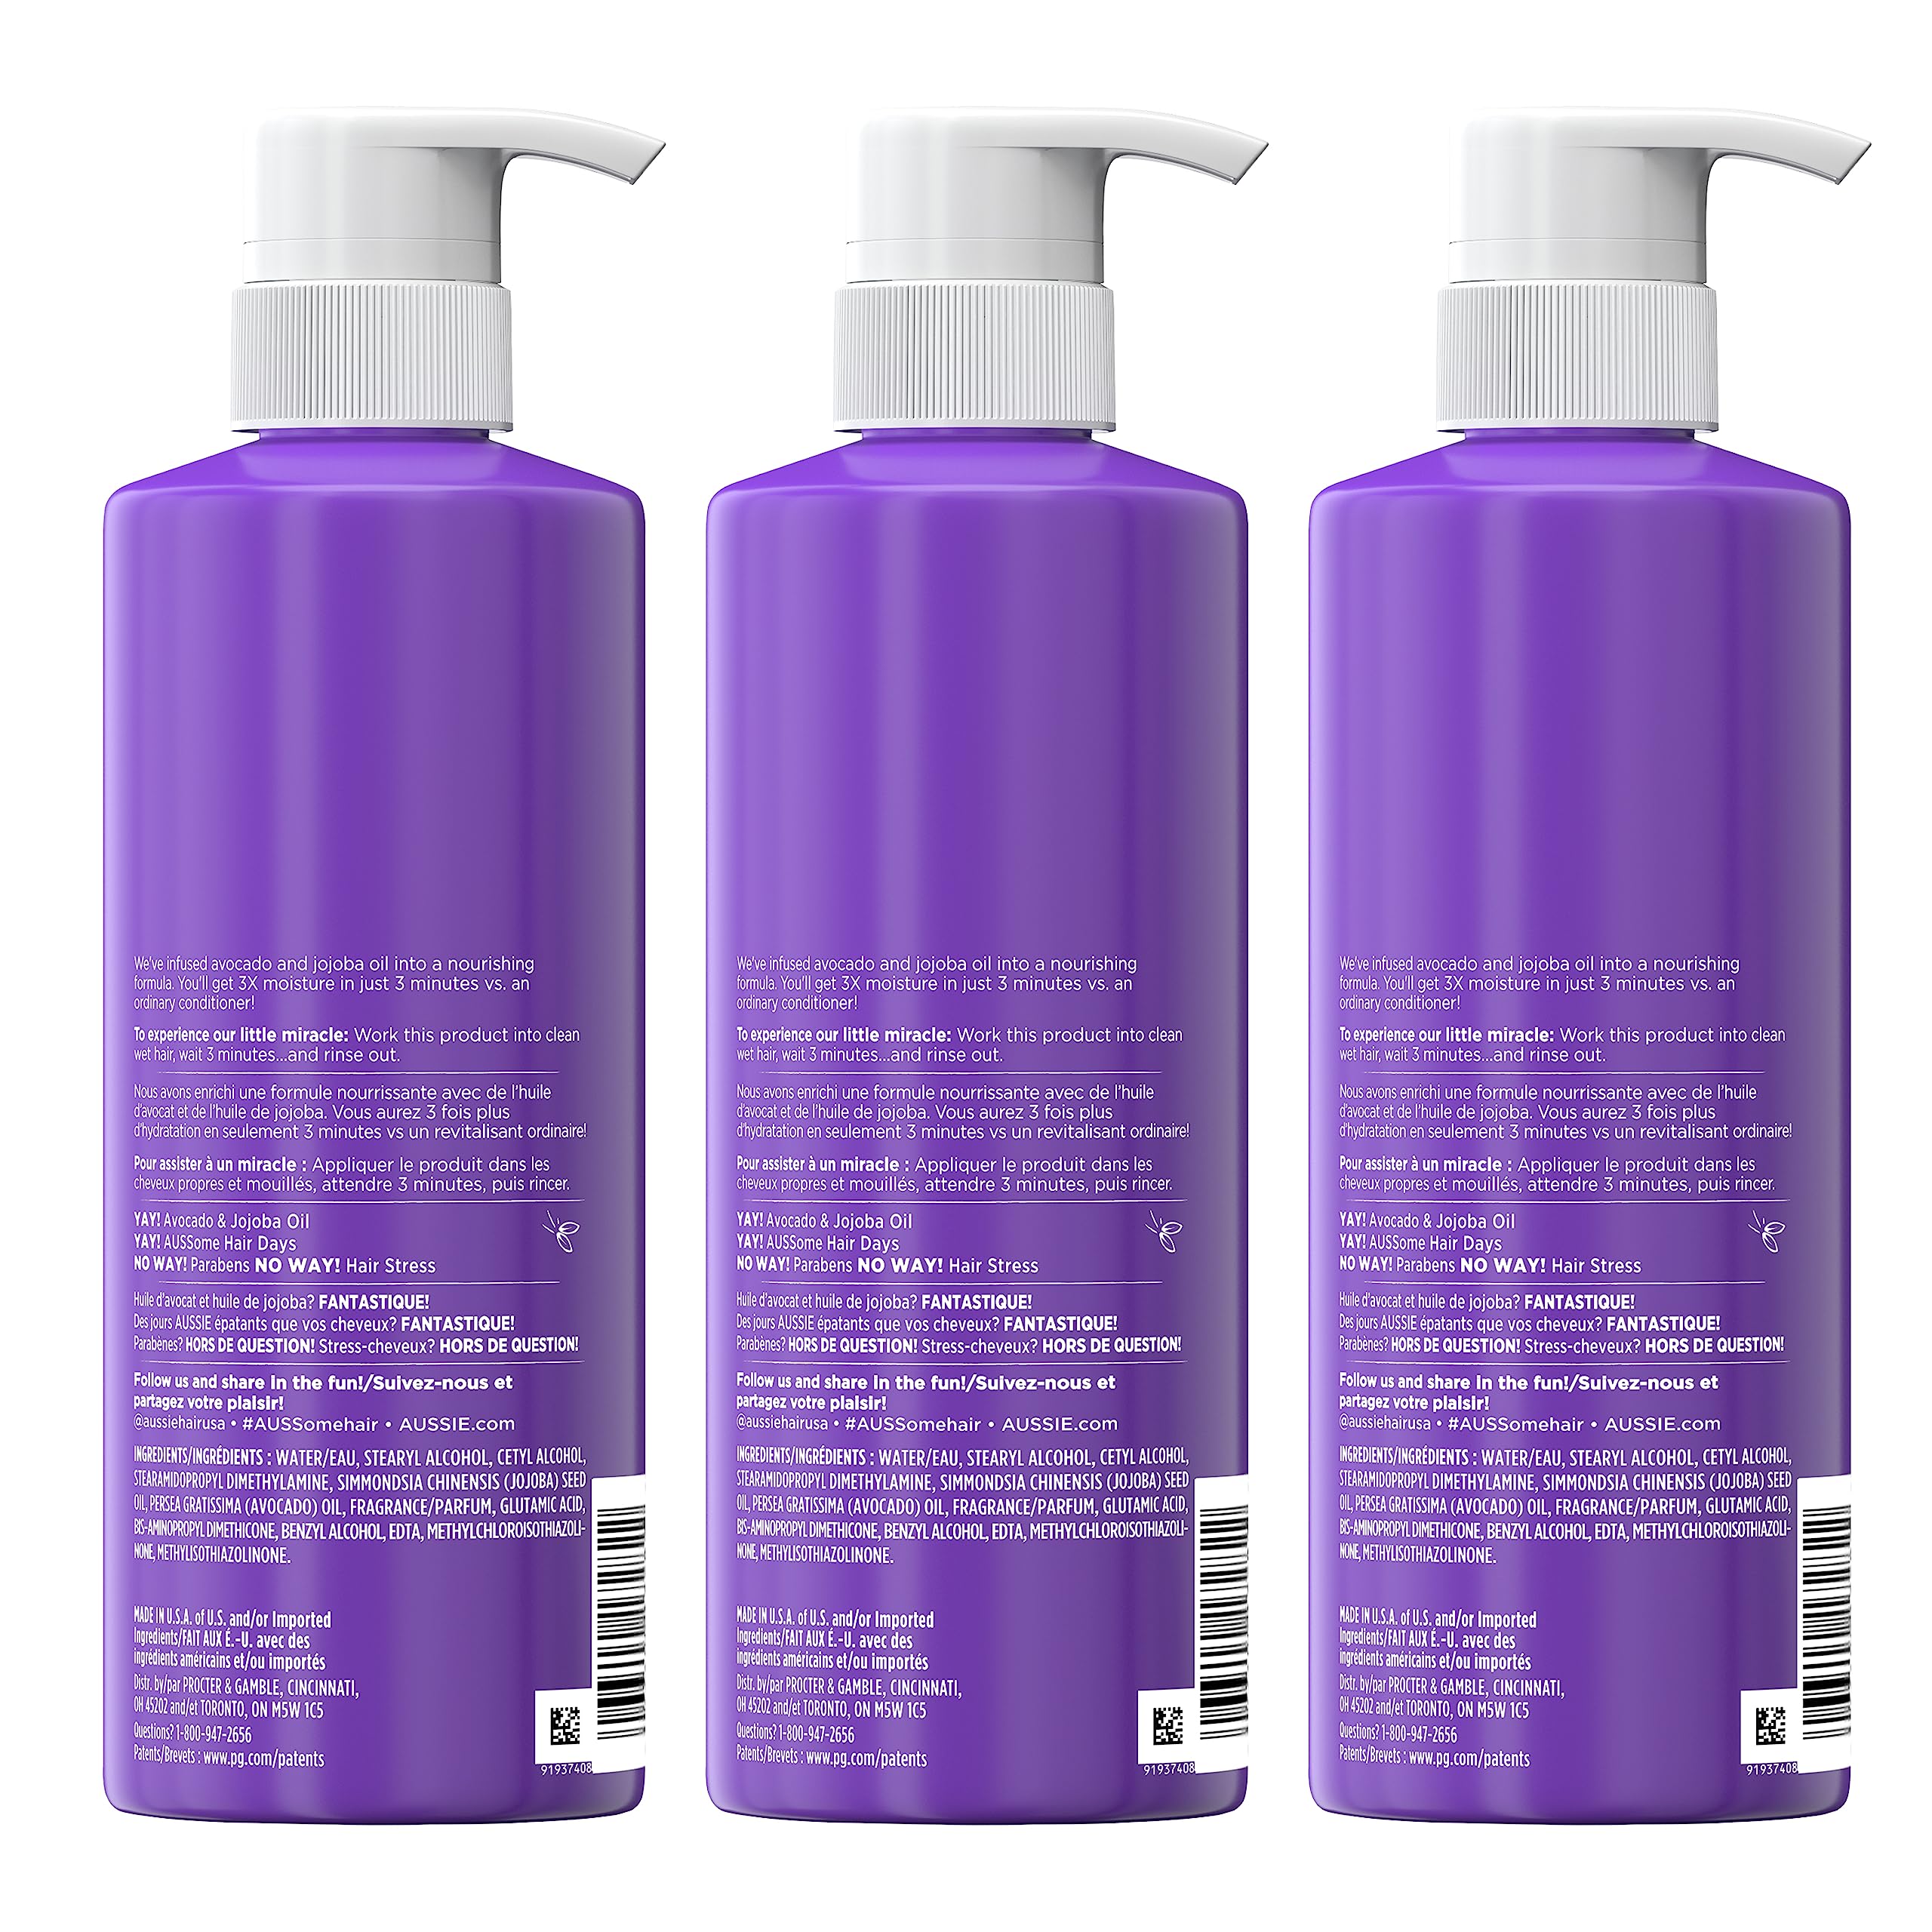 Aussie Deep Conditioner For Dry Hair with Avocado, Paraben Free, 3 Minute Miracle Moist, 16 Fl Oz Each, Triple Pack